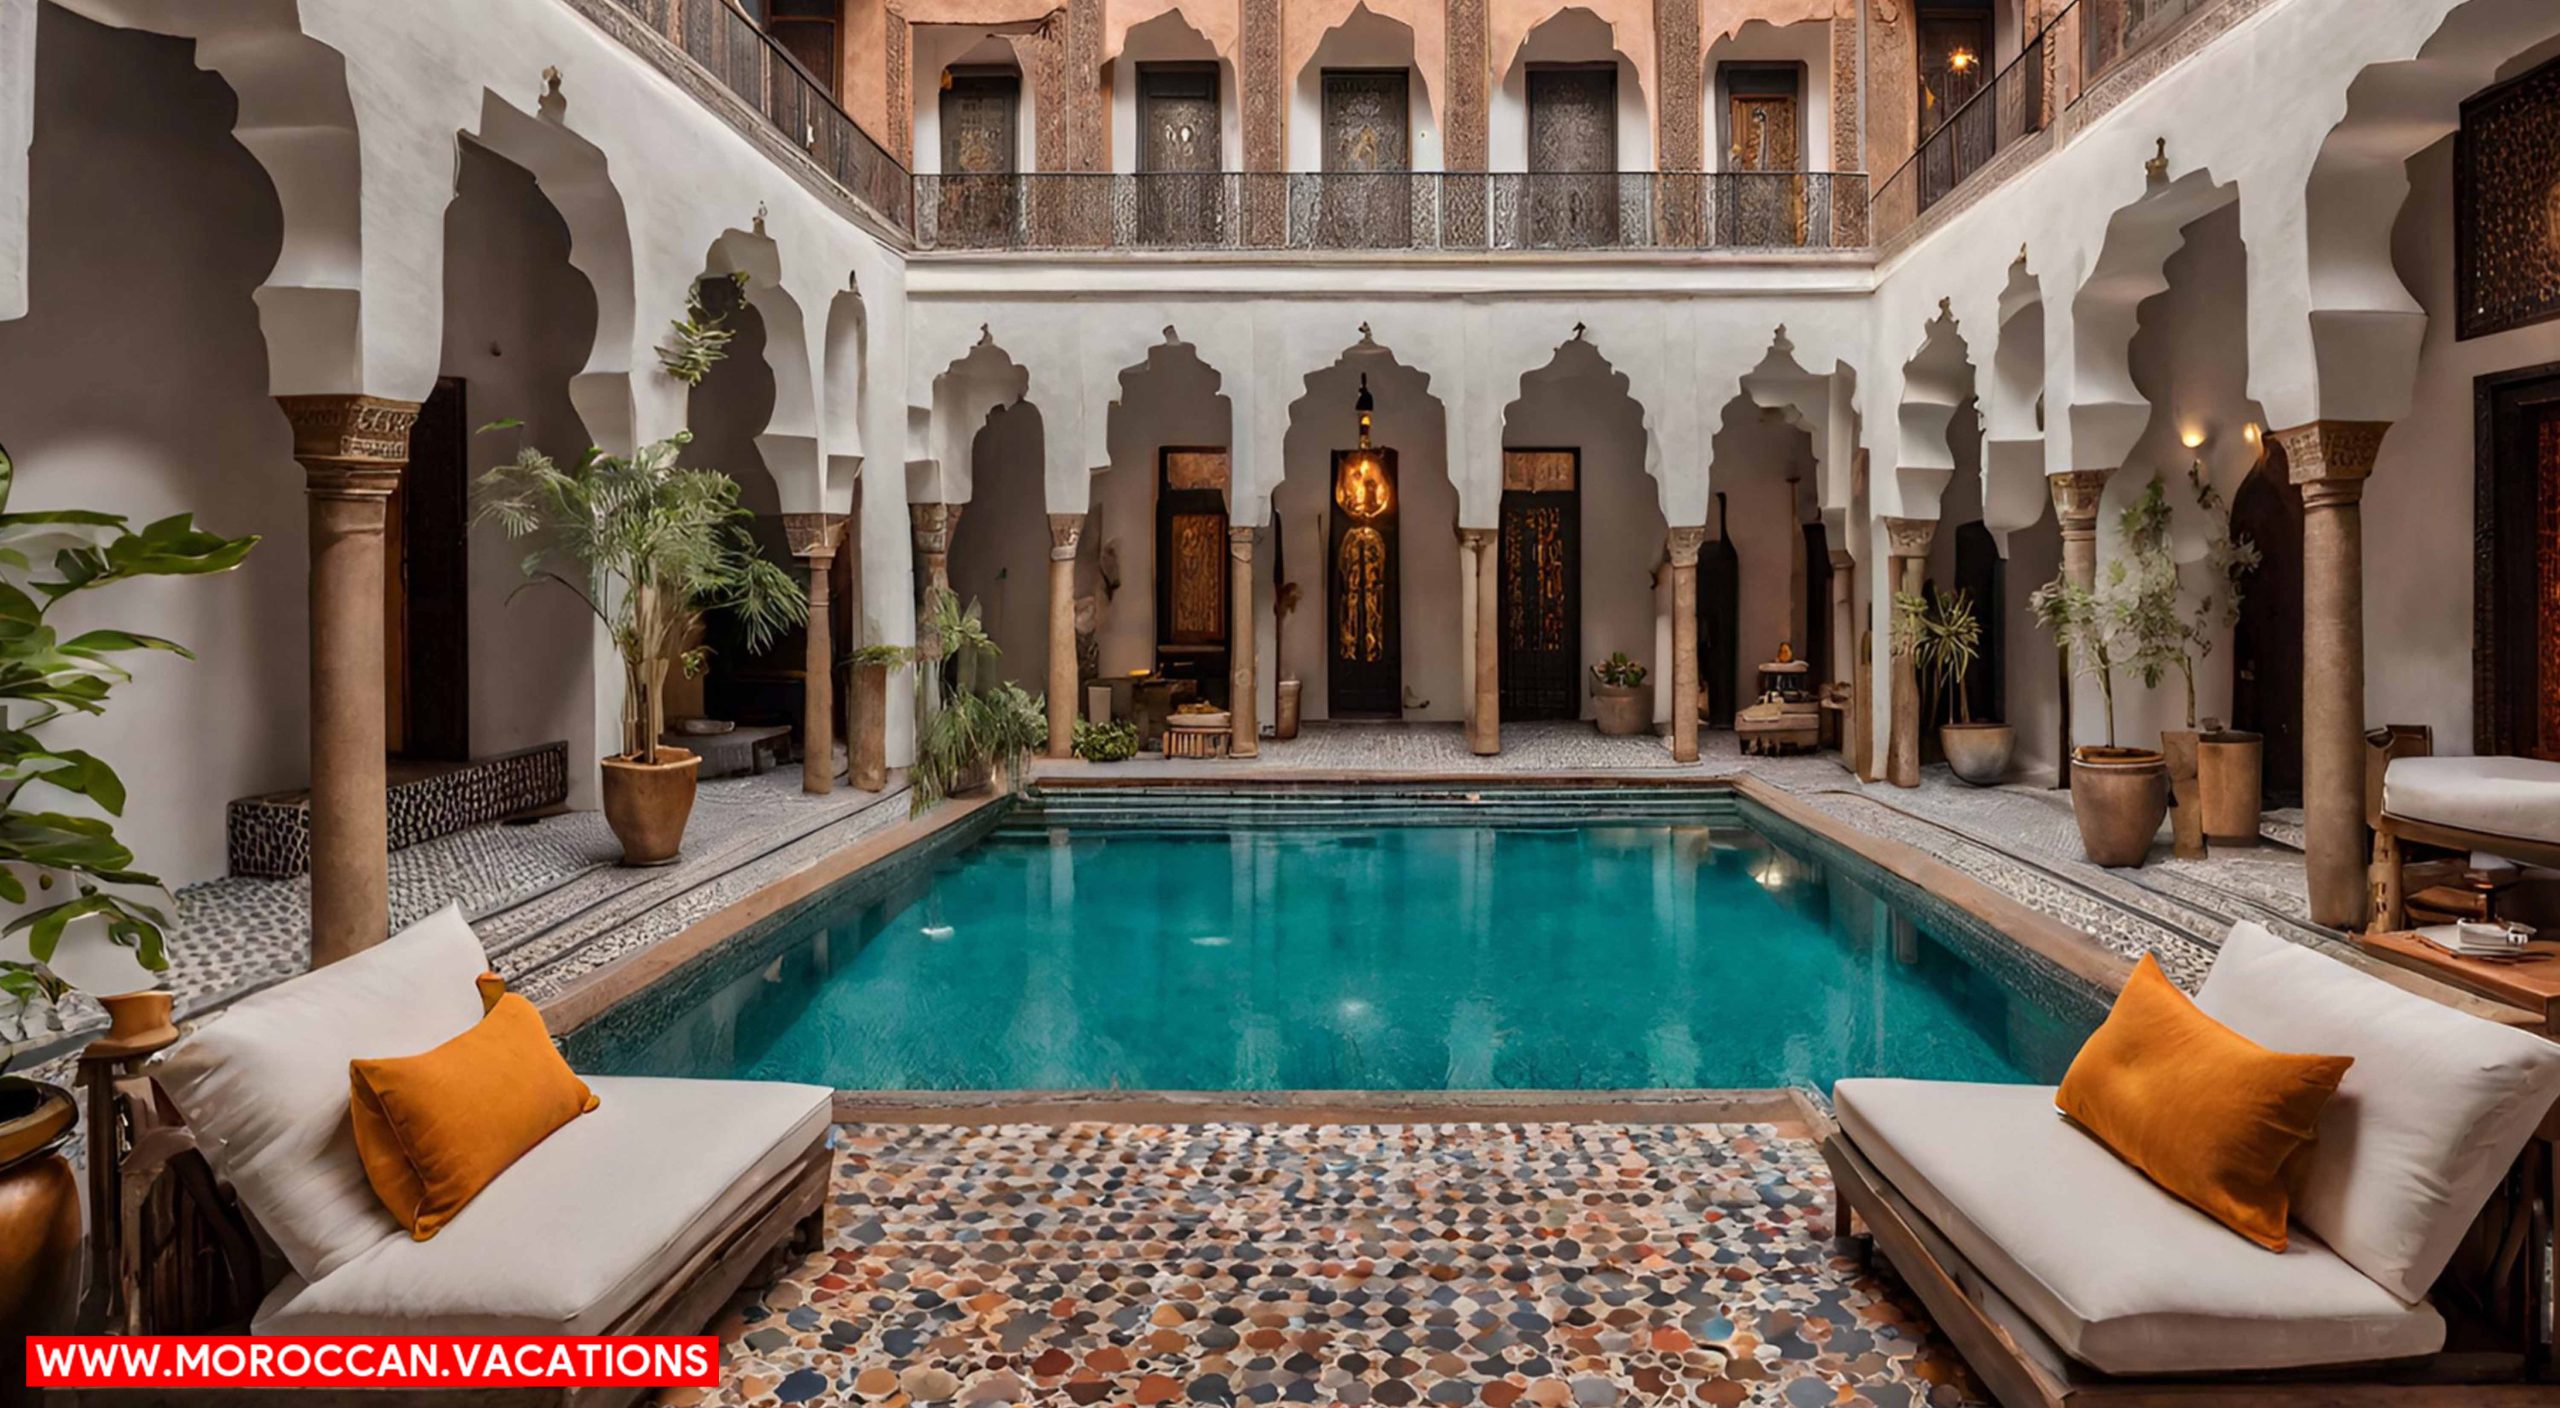 A luxurious, traditional Moroccan riad in Marrakech with a mosaic tiled courtyard.